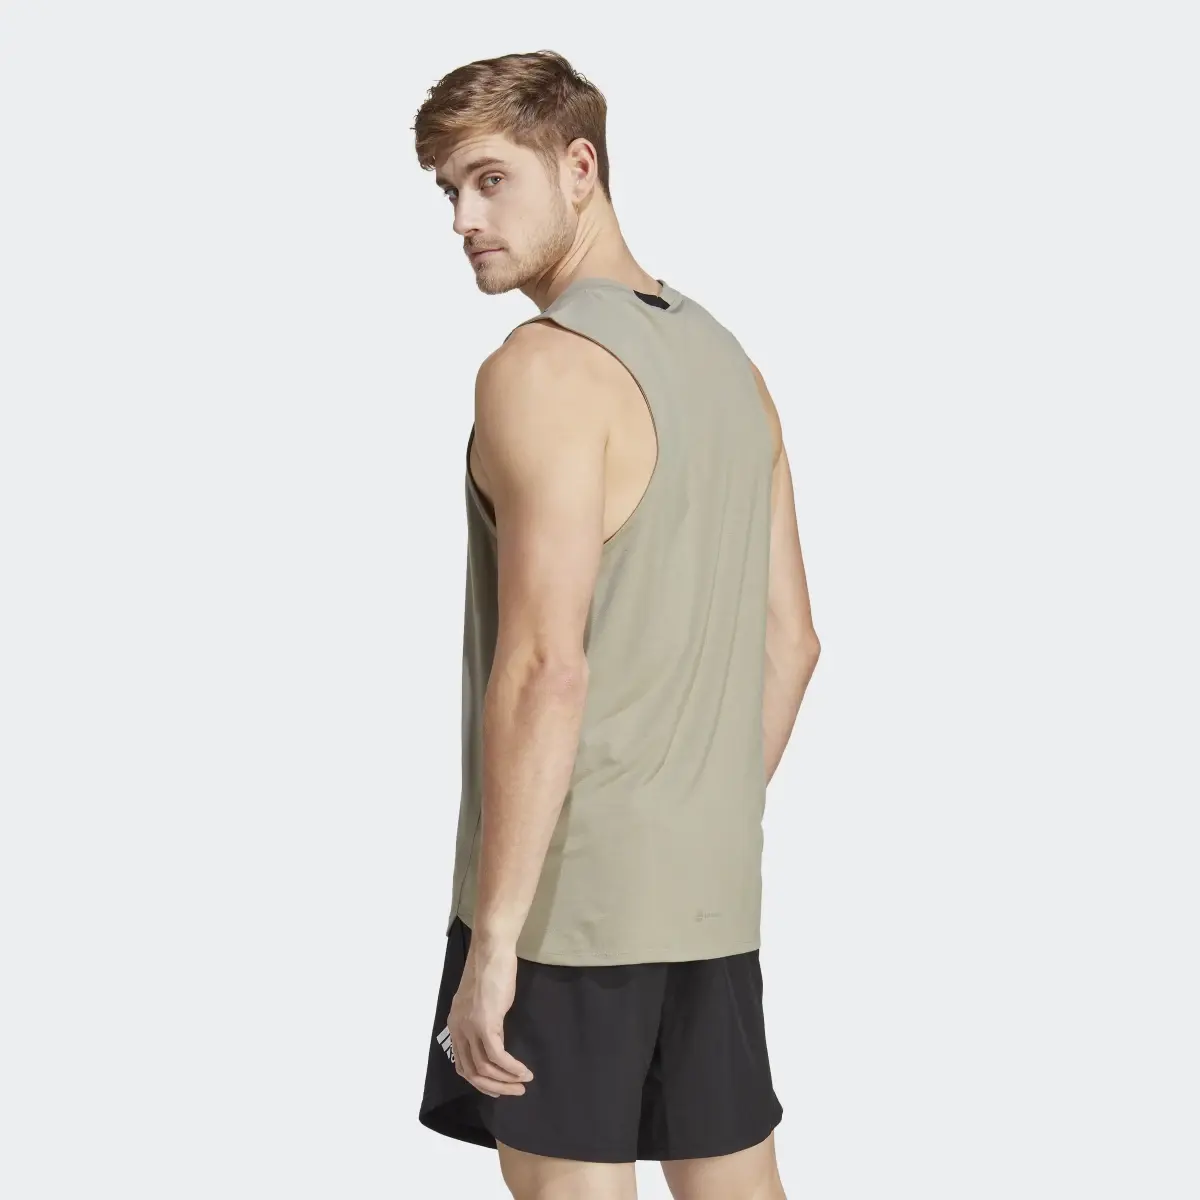 Adidas Designed for Training Workout Tank Top. 3